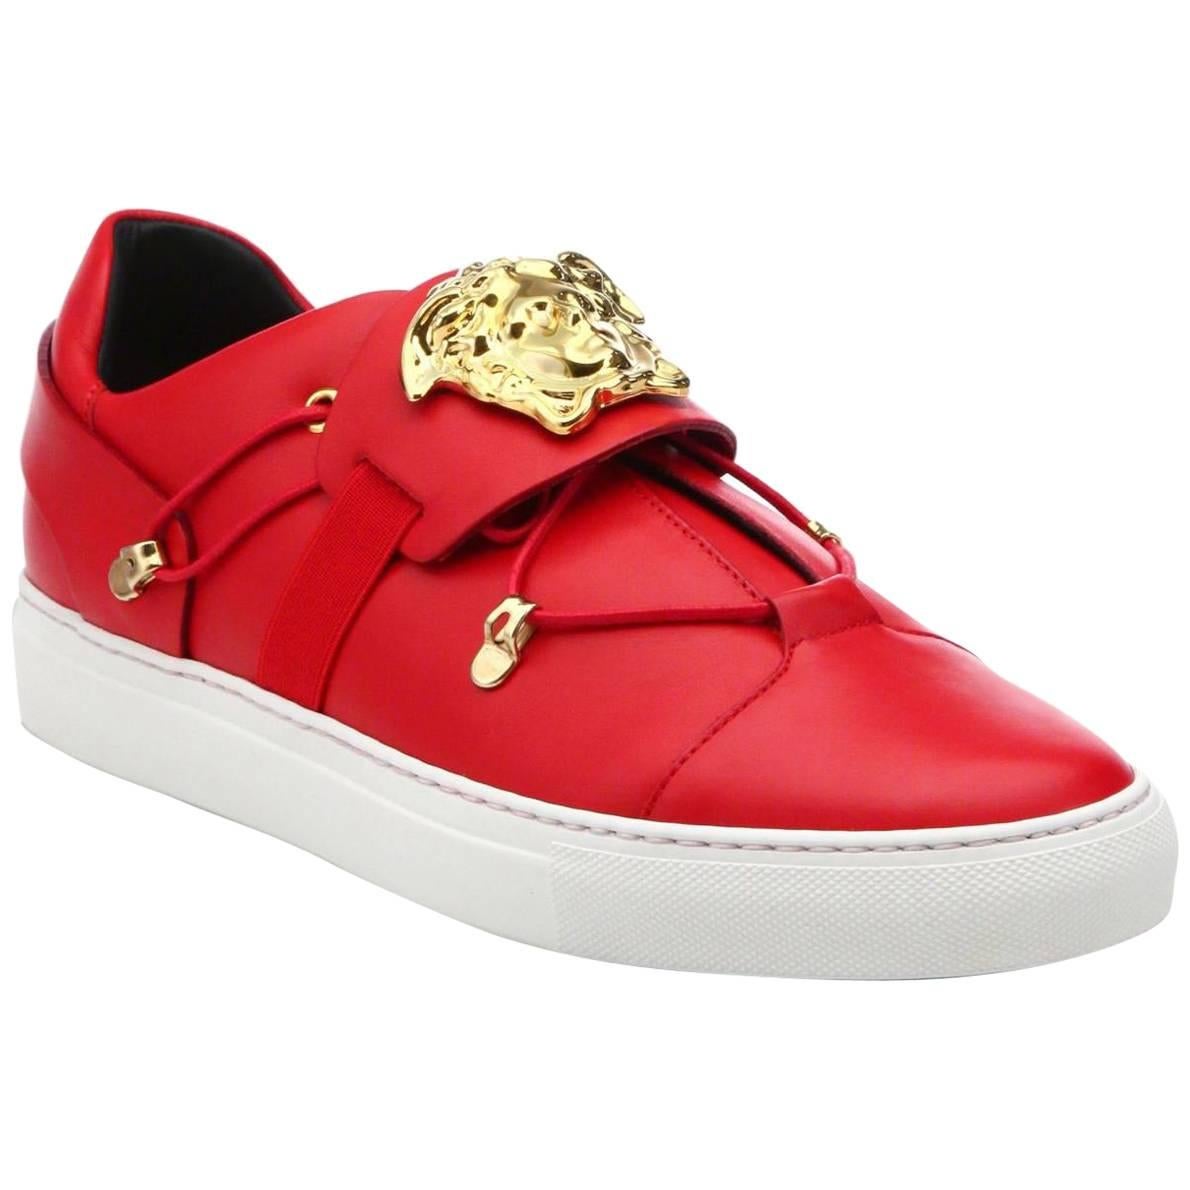 Versace Red Leather Palazzo Low Top Sneakers for Men